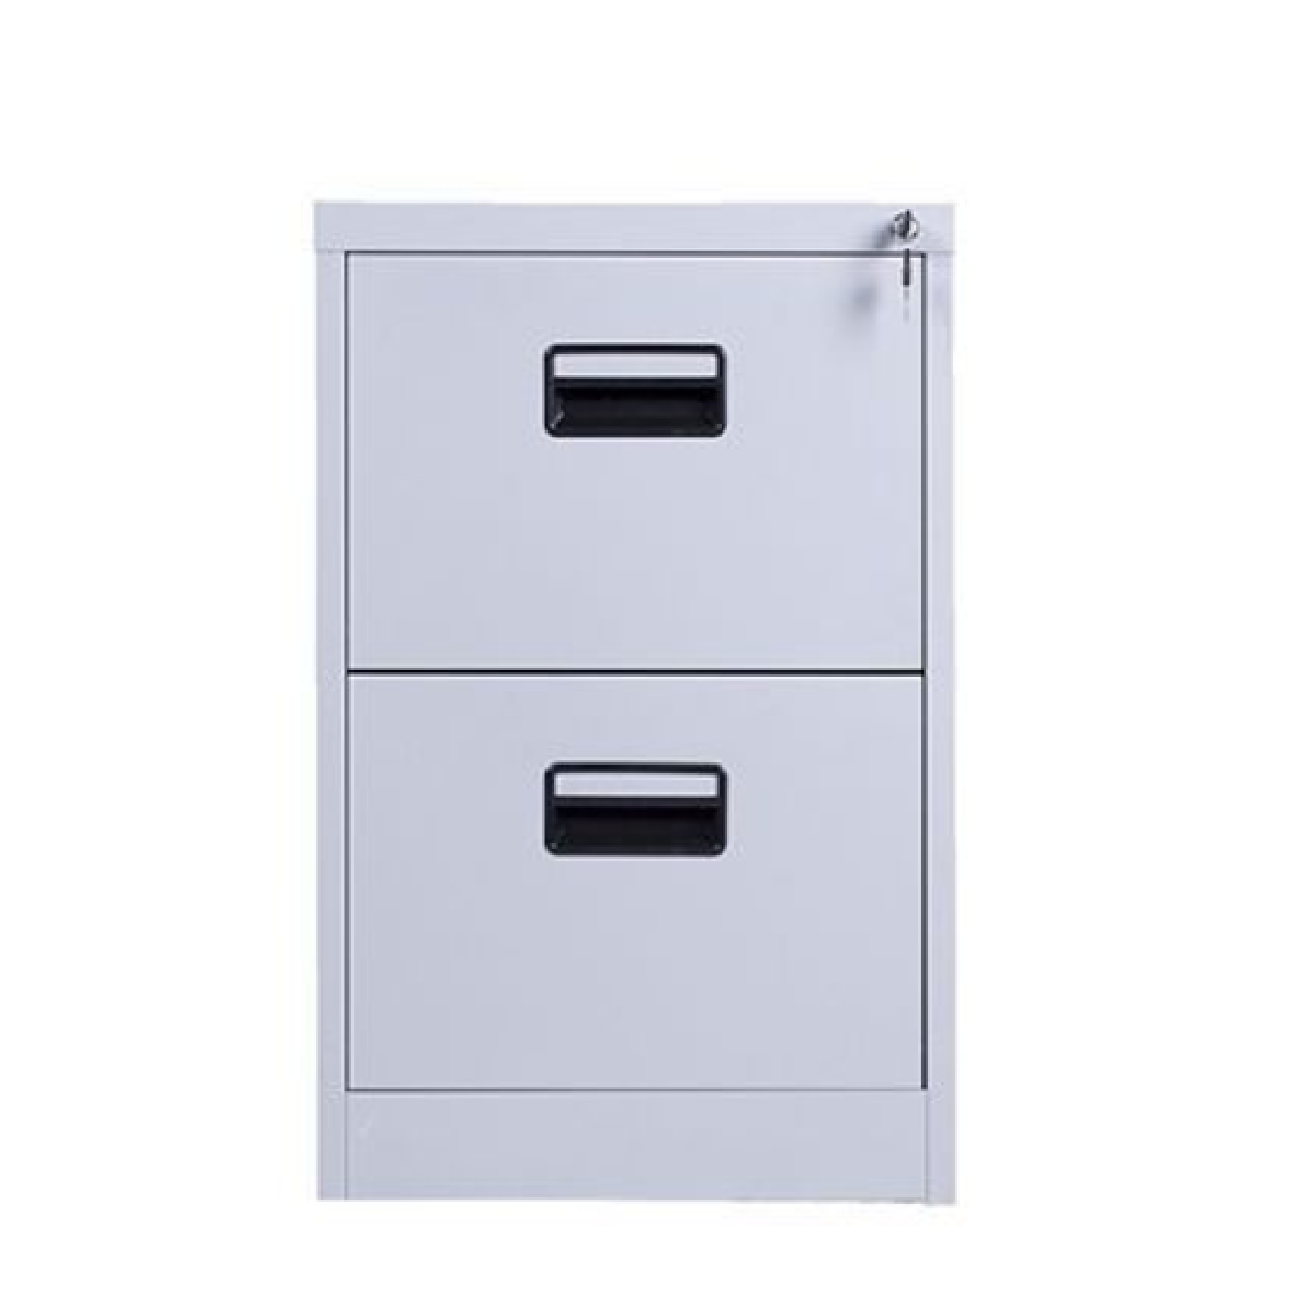 SY402, 2 DRAWER Filing Cabinet